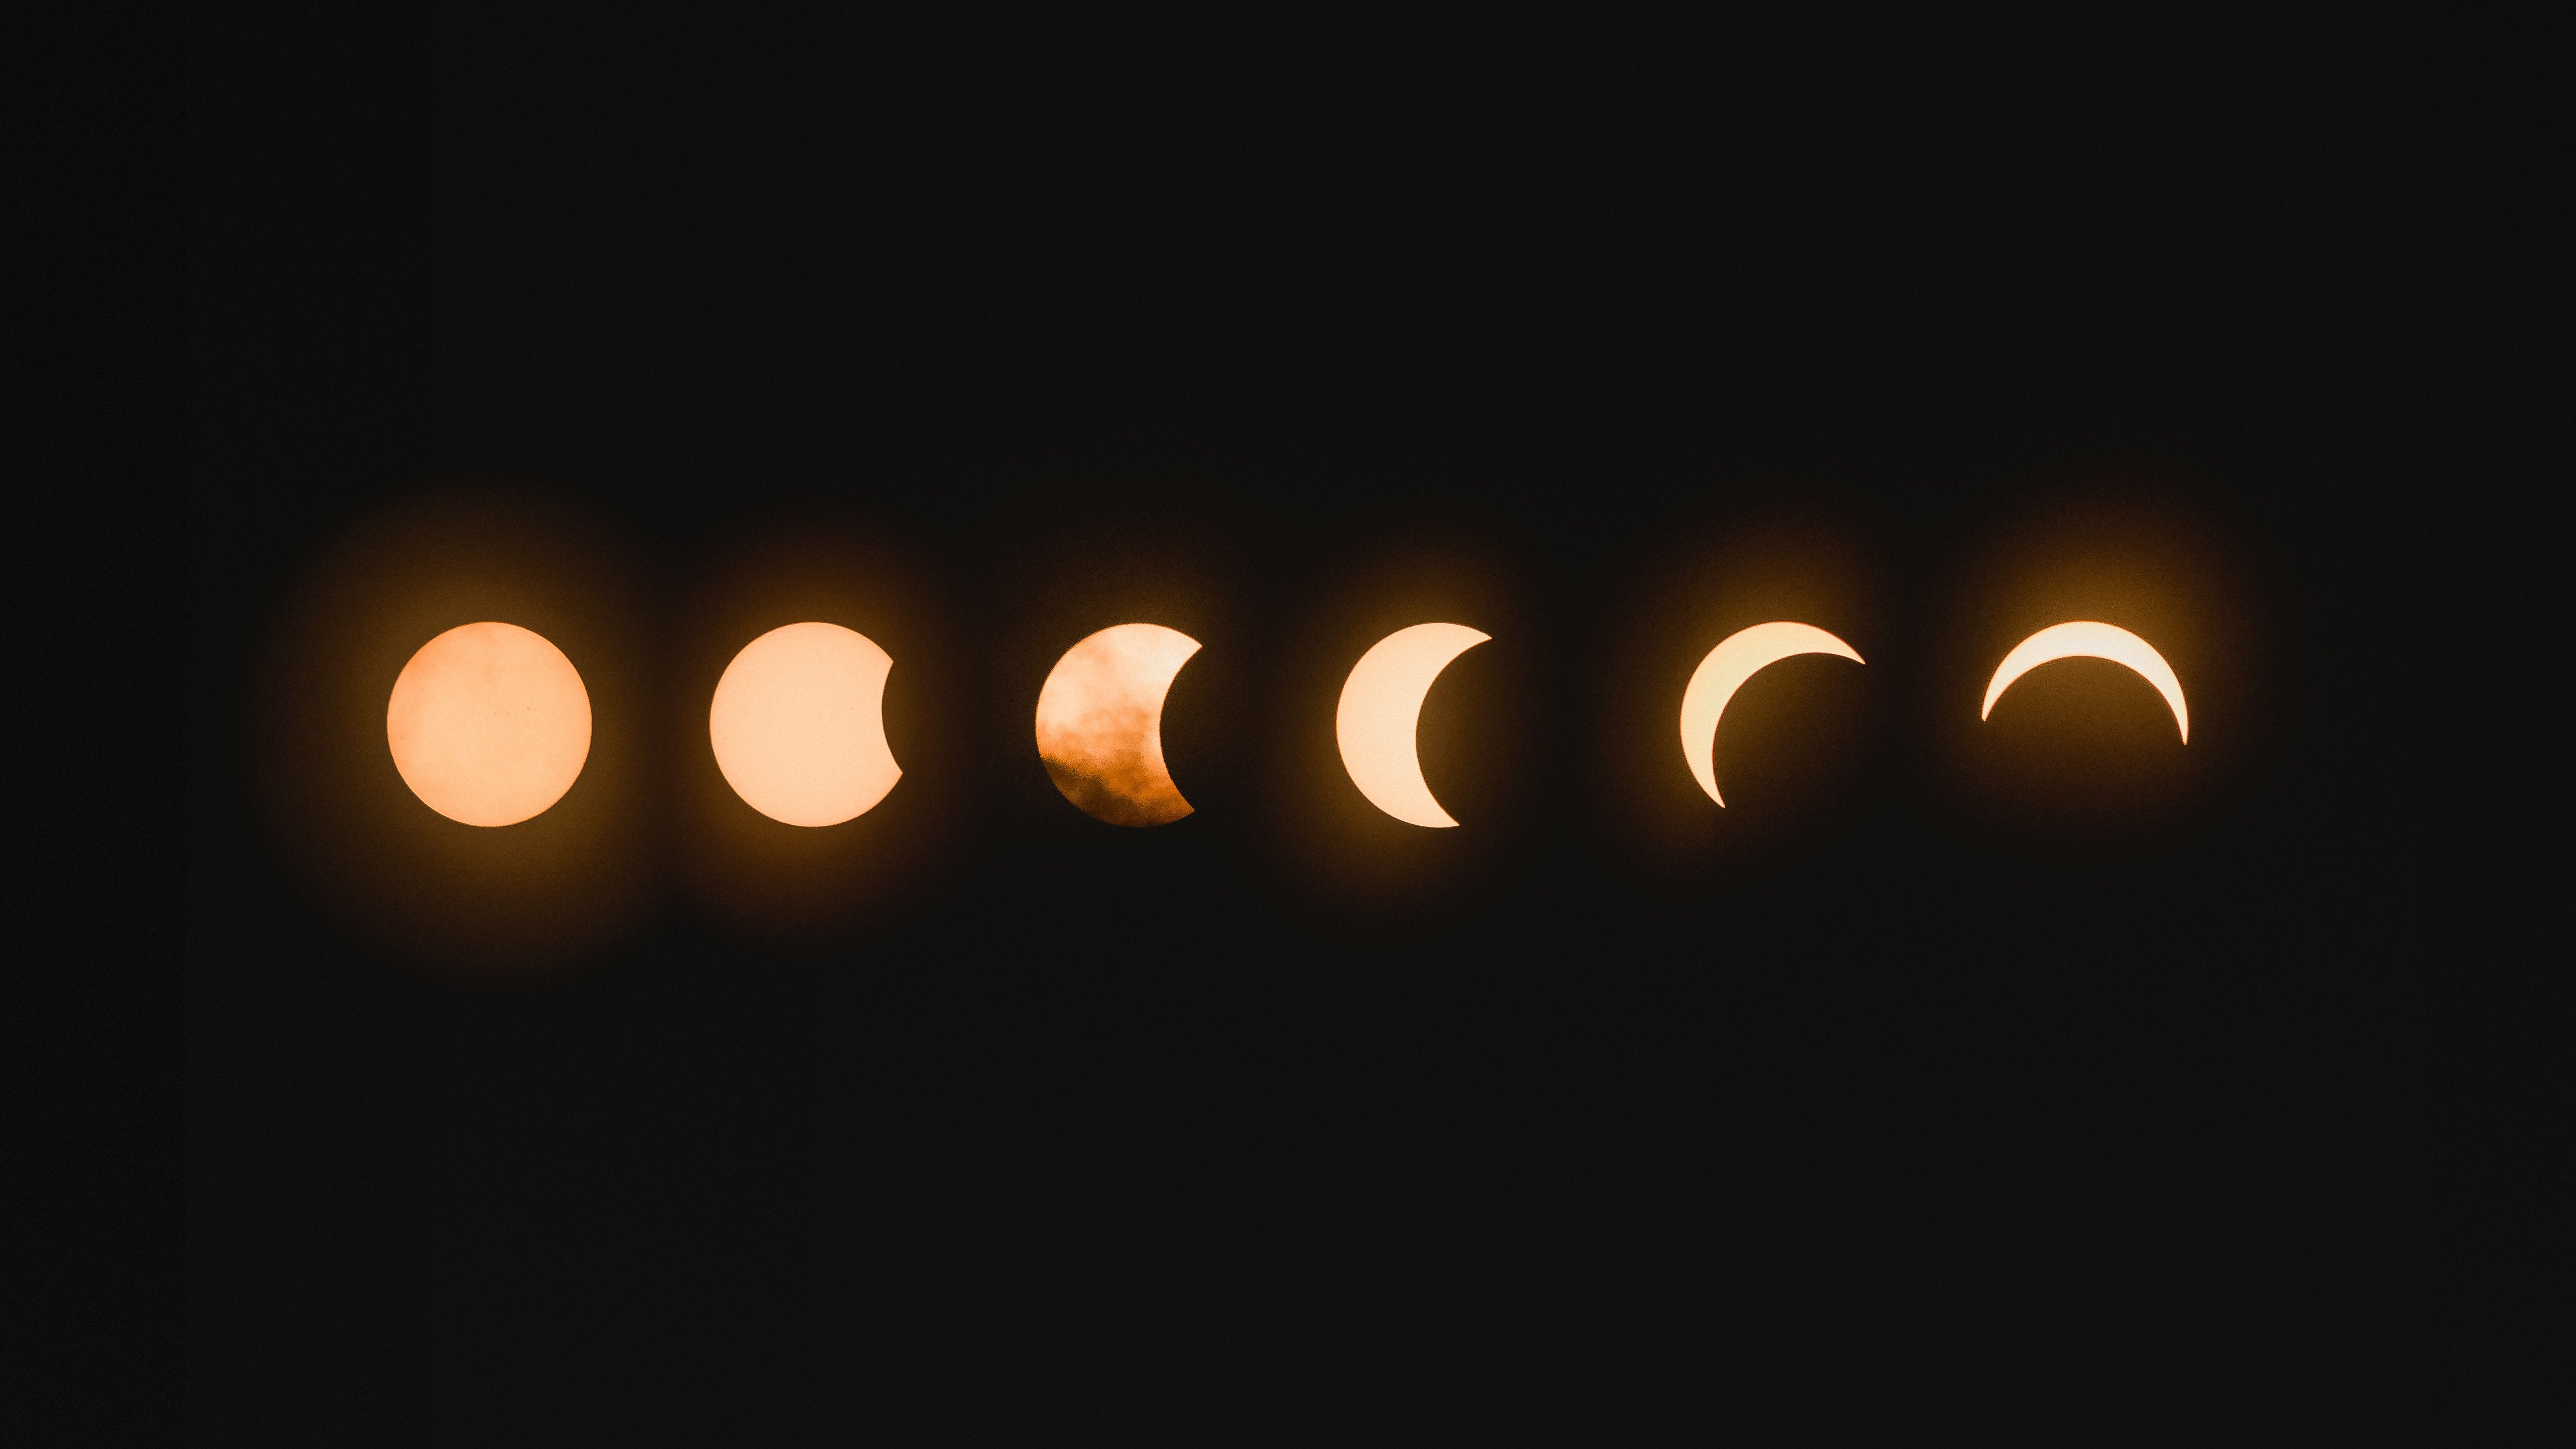 5184x2916 cool background, moon, darkness, solar, partial eclipse, time lapse, halloween, sun, universe, cool wallpaper, wallpaper, eclipse, PNG image Gallery HD Wallpaper